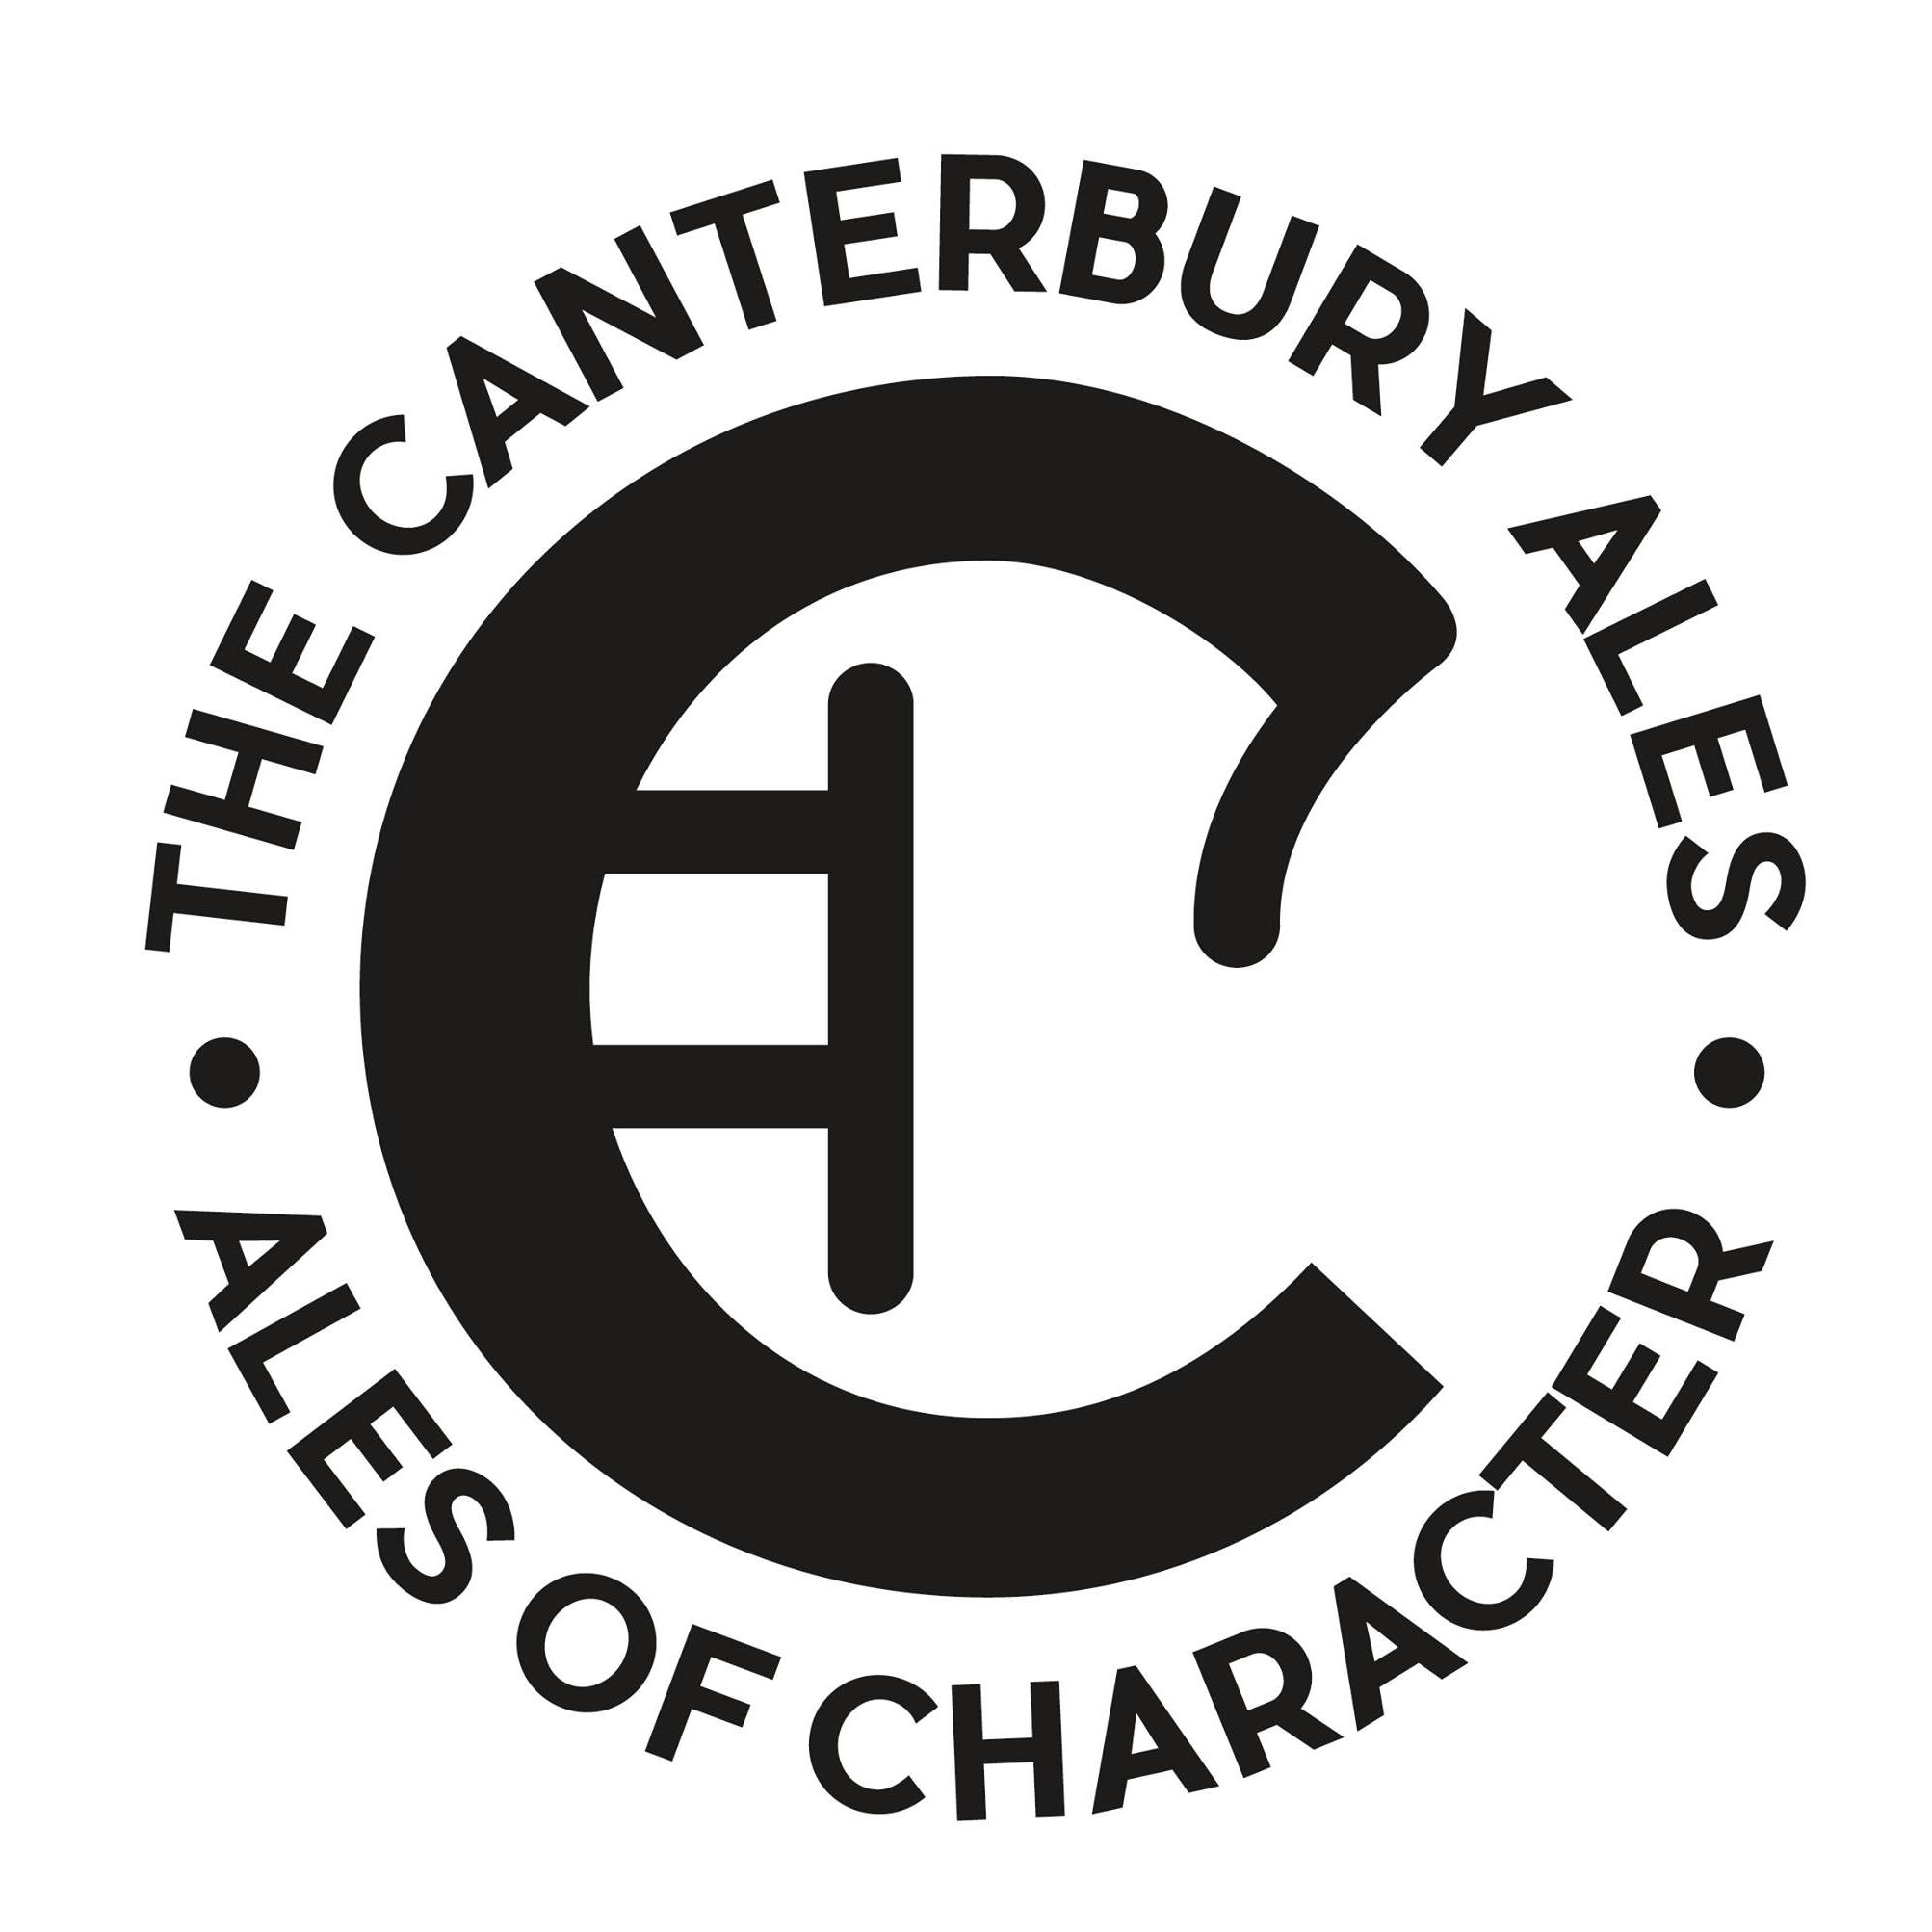 NZ Pale, an Ale from The Canterbury Ales (Canterbrew)